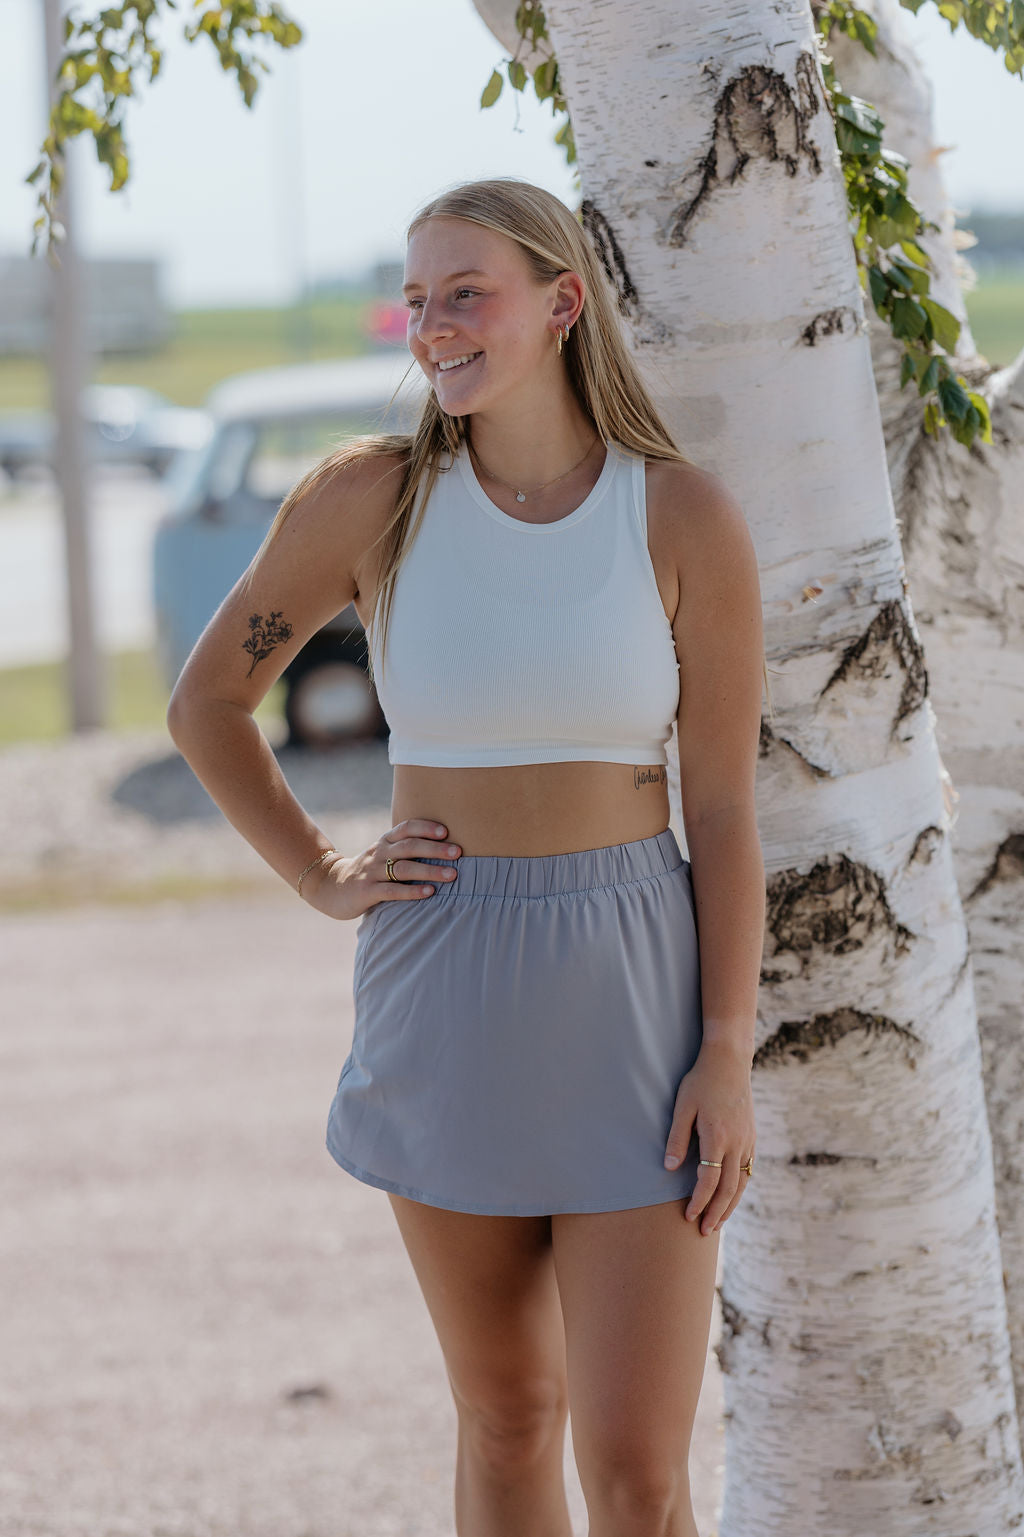 LOTTIE CROPPED RACER CROP TANK TOP 2 COLOR OPTIONS BY IVY & CO